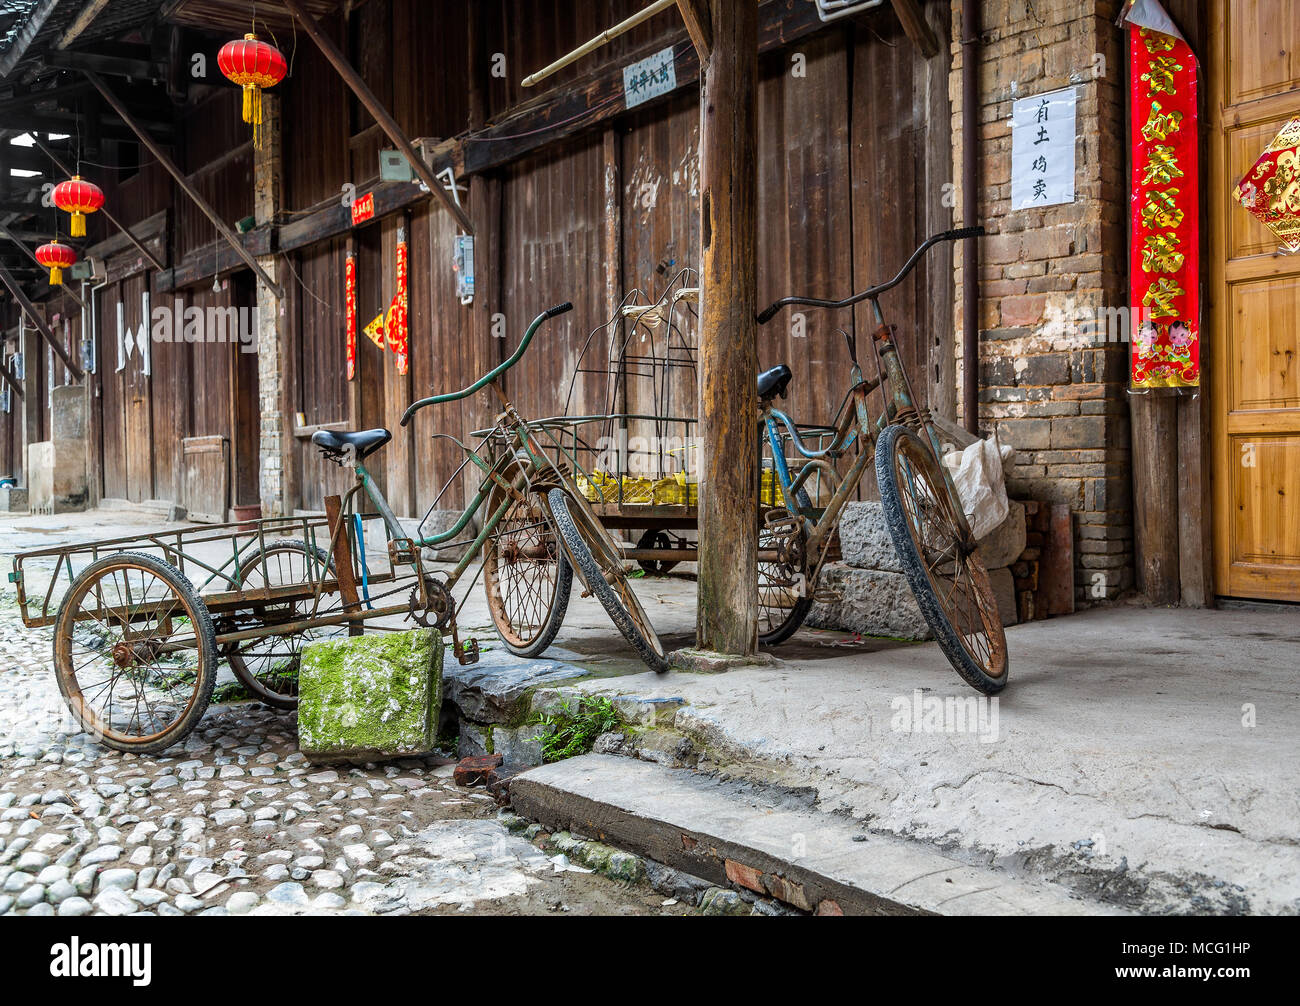 Two tricycles parked by a doorway on a cobbled street in the ancient town of Daxu, China. Red Chinese lanterns hang from canopies and line the street. Stock Photo